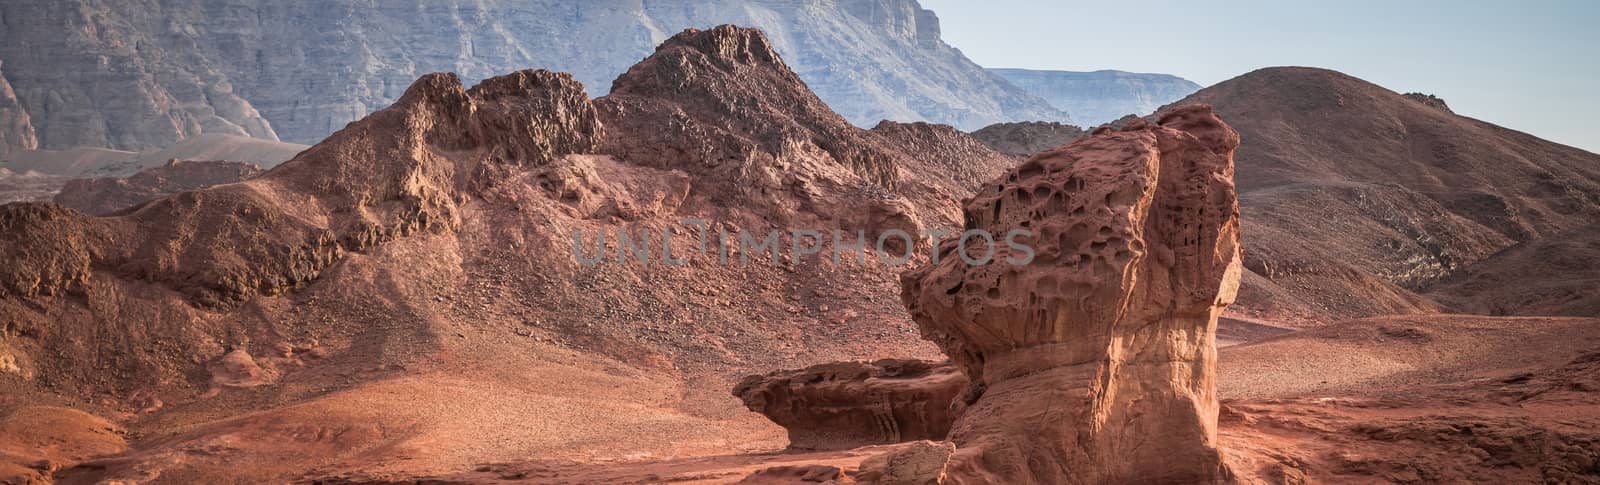 the valley view point in timna national park i by compuinfoto